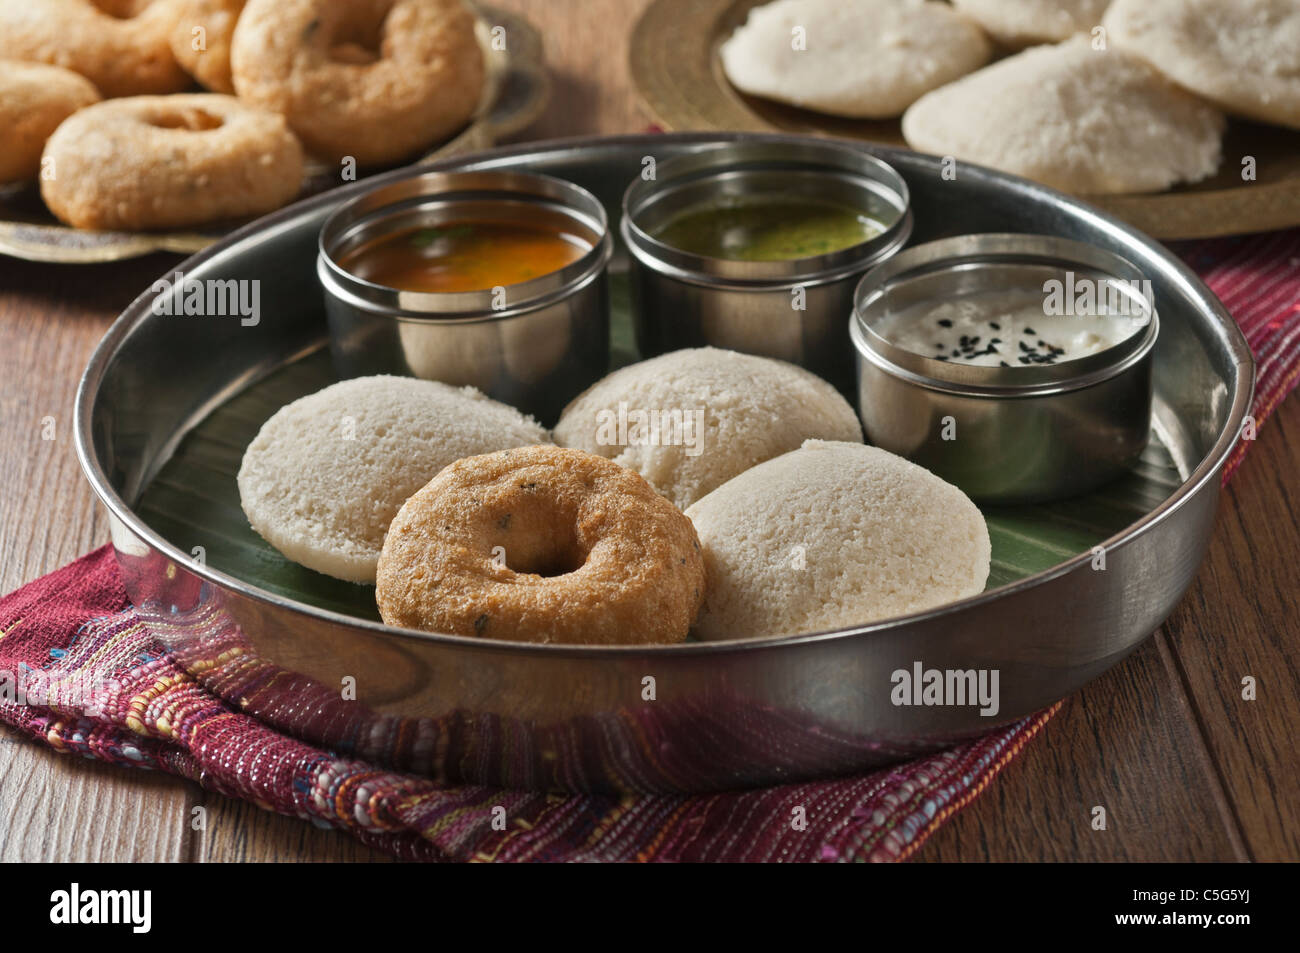 Idly wada. Steamed rice cakes and lentil fritter. South Indian breakfast snack Stock Photo